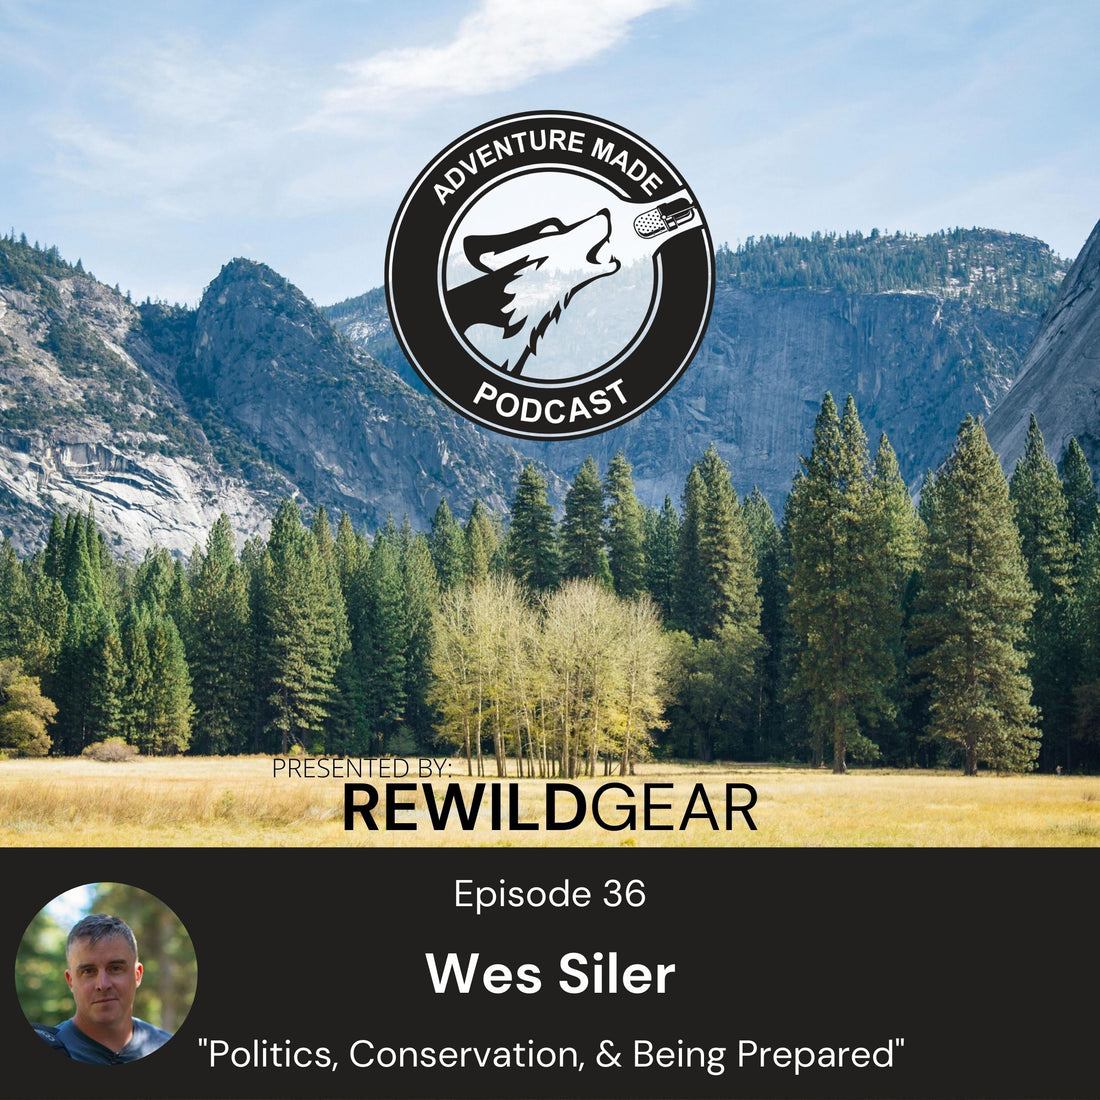 Ep 36: Wes Siler on Politics, Conservation, & Being Prepared